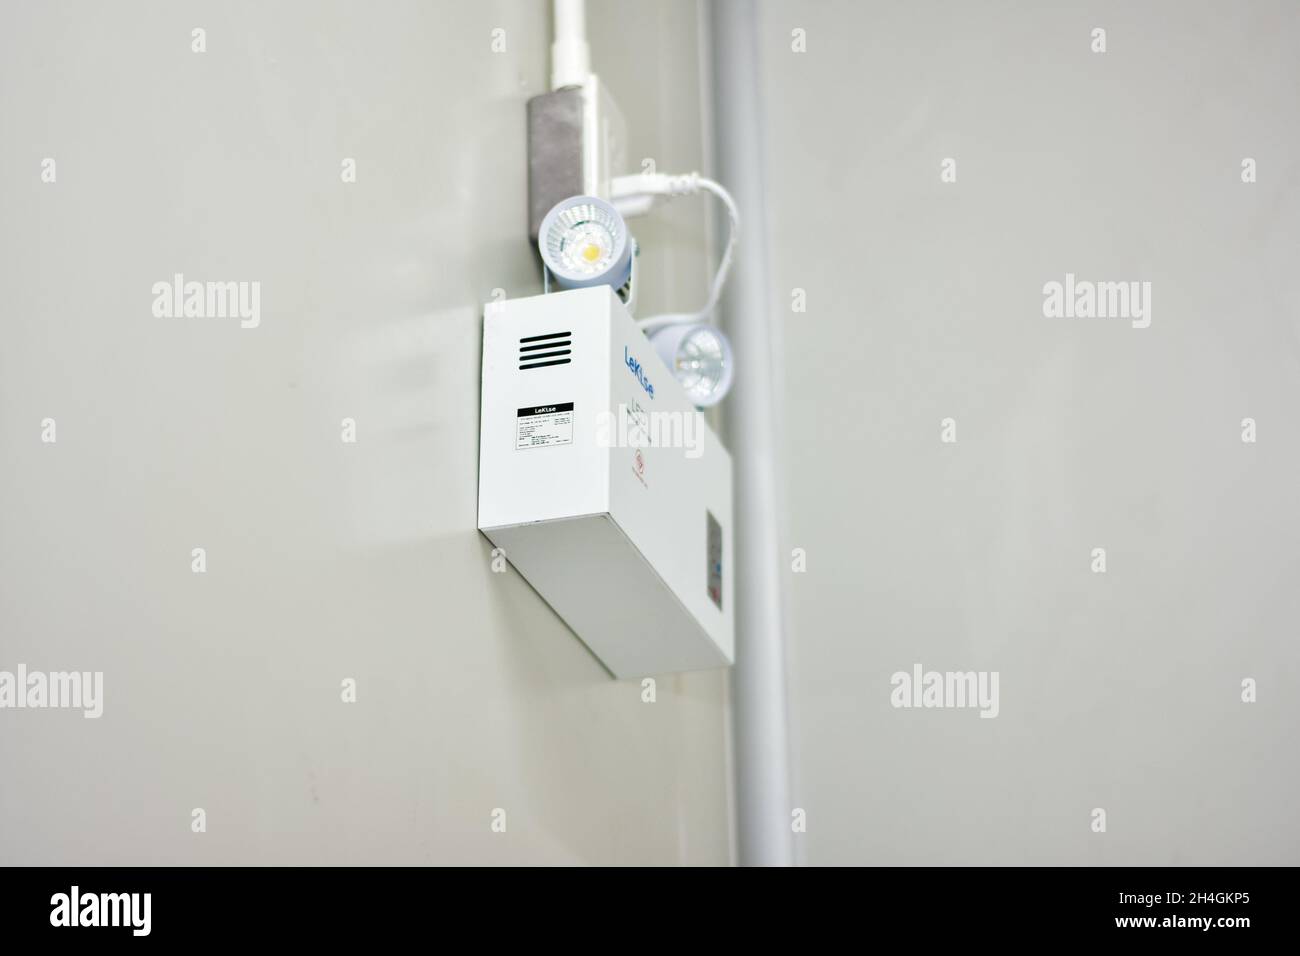 https://c8.alamy.com/comp/2H4GKP5/emergency-lighting-guiding-light-to-escape-fire-during-fire-accidents-in-industrial-plants-2H4GKP5.jpg